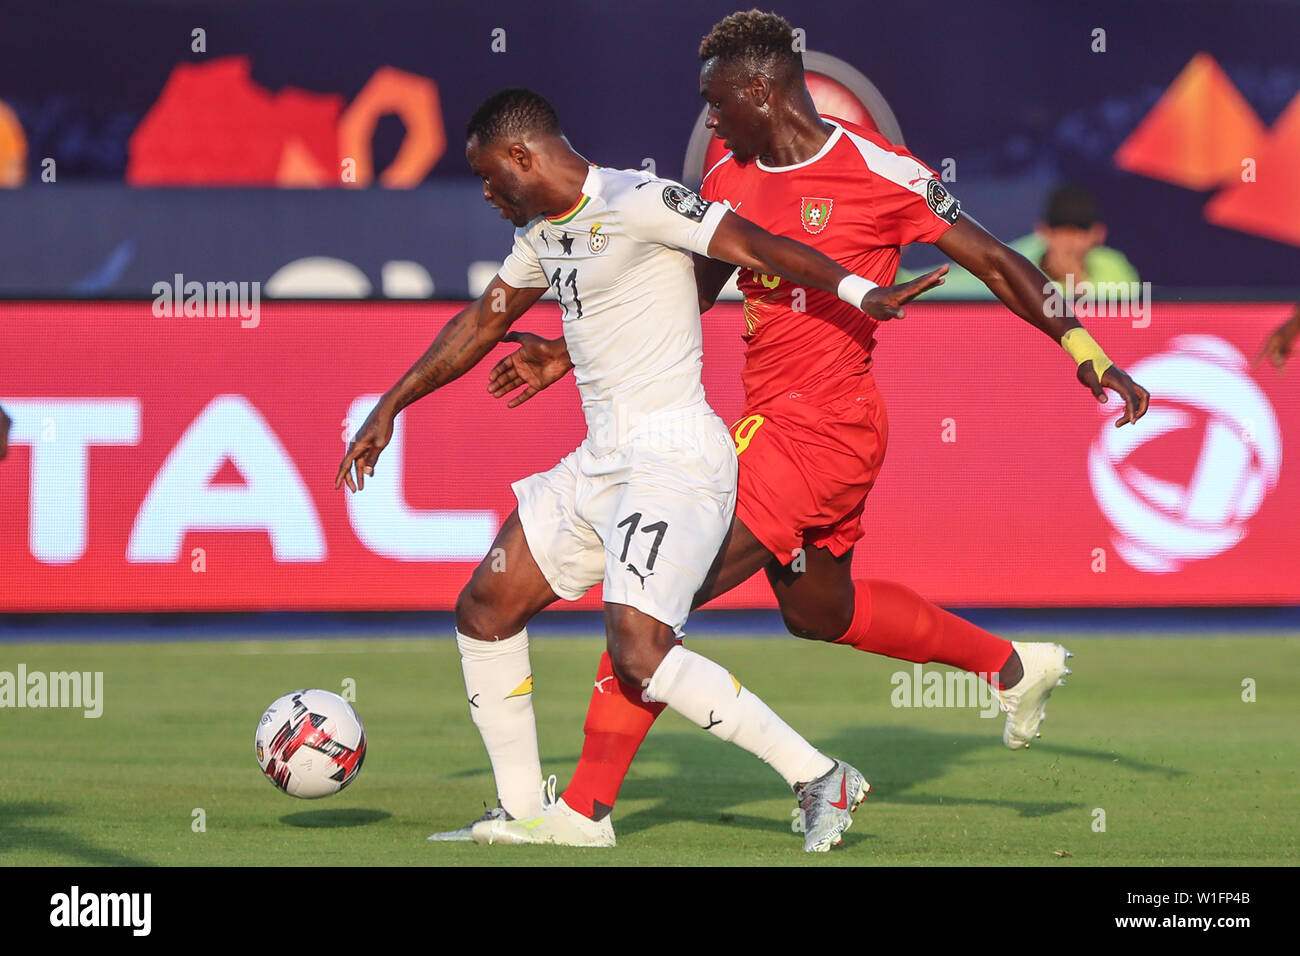 Suez, Egypt. 02nd July, 2019. Guinea-Bissau's Joseph Mendes and Ghana's Mubarak Wakaso battle for the ball during the 2019 Africa Cup of Nations Group F soccer match between Guinea-Bissau and Ghana at the Suez Stadium. Credit: Omar Zoheiry/dpa/Alamy Live News Stock Photo